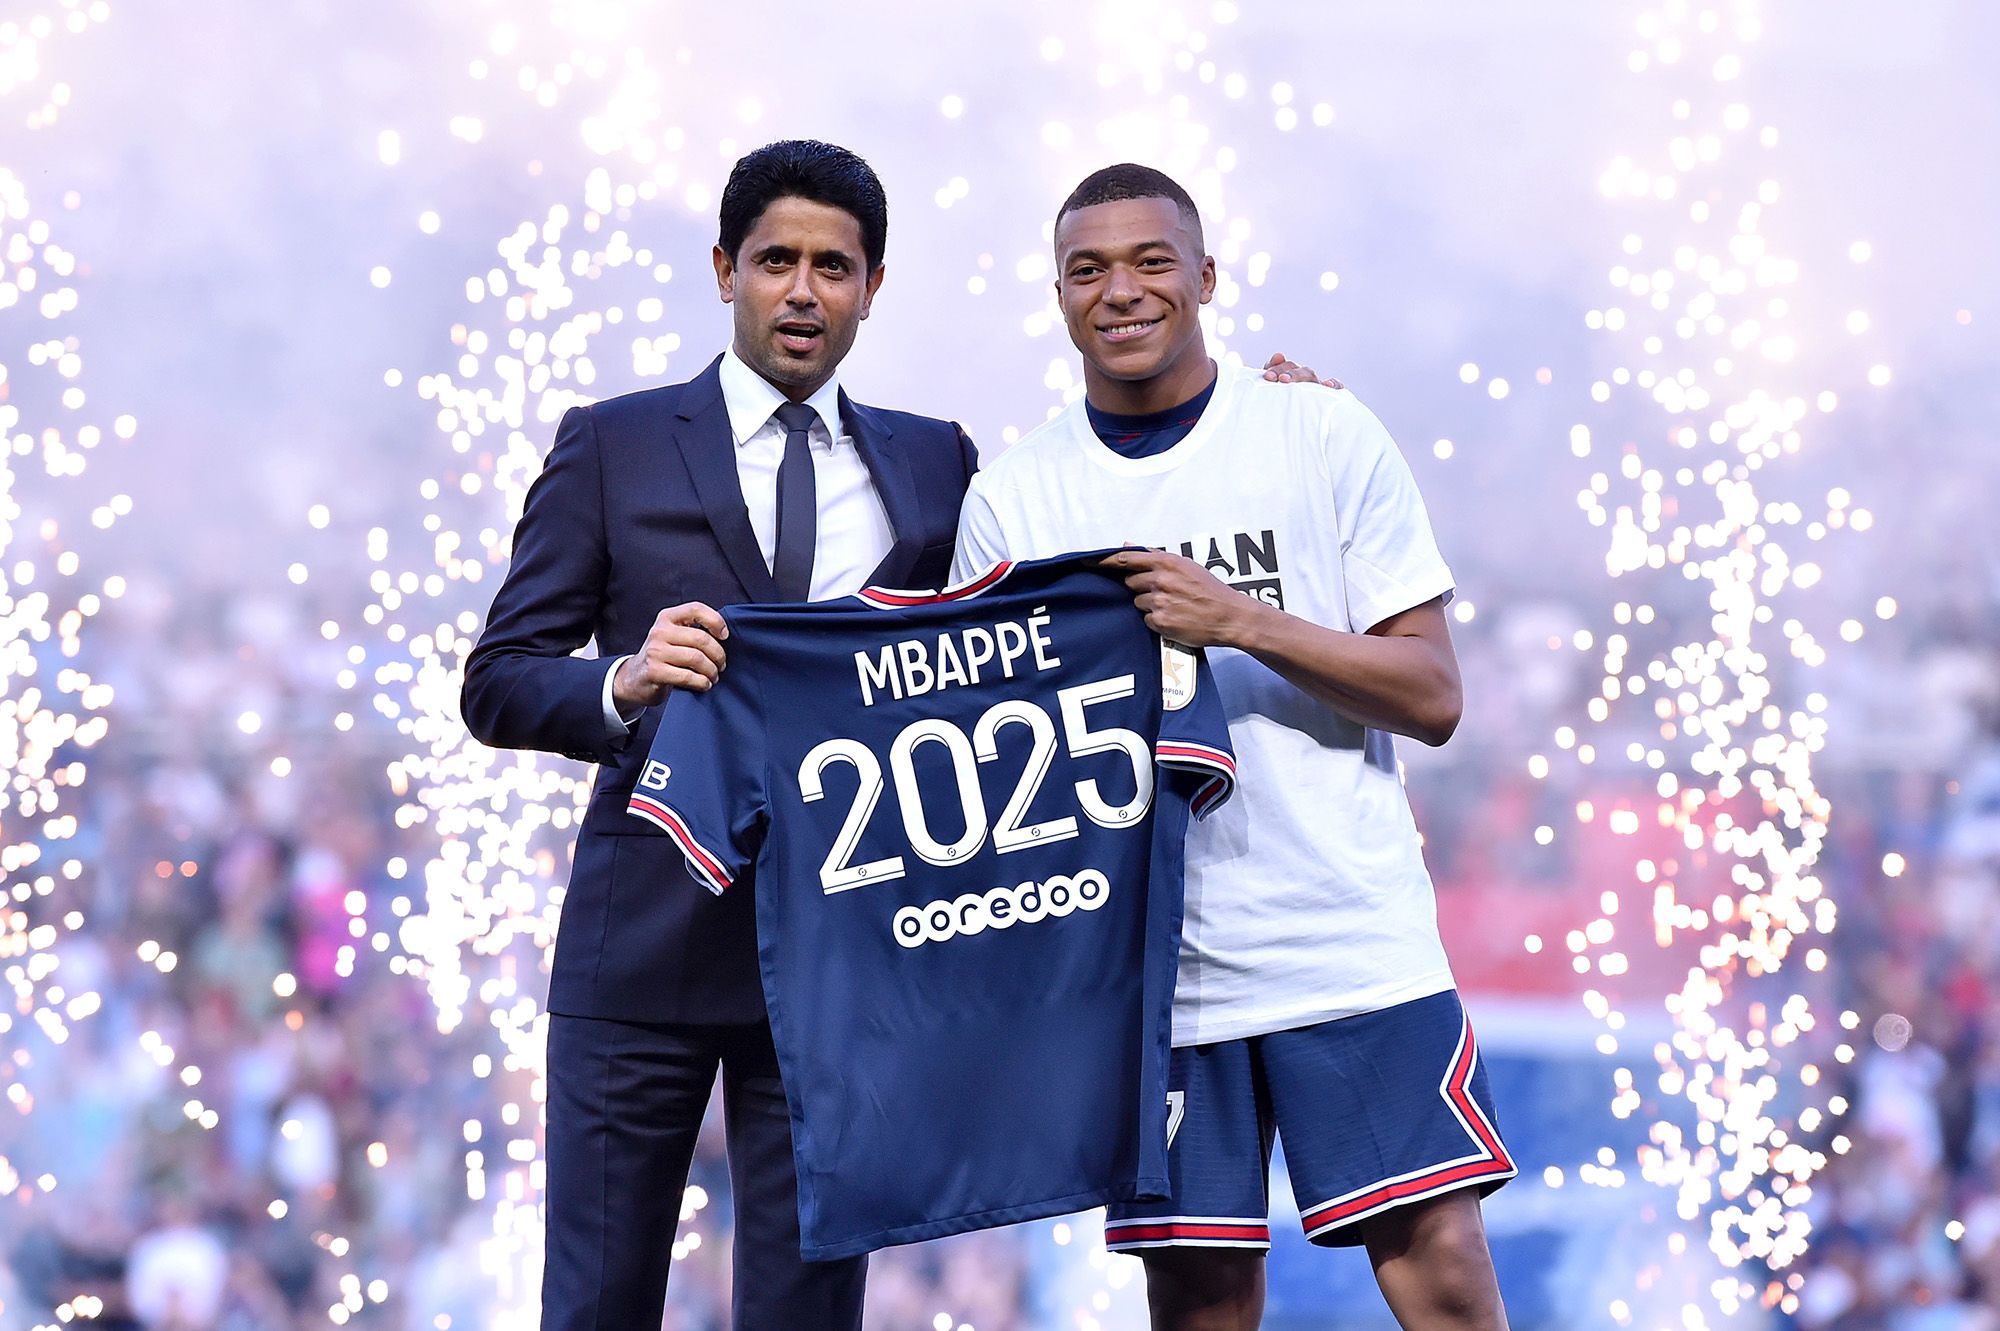 Kylian Mbappé: 'The supporters bring us a lot